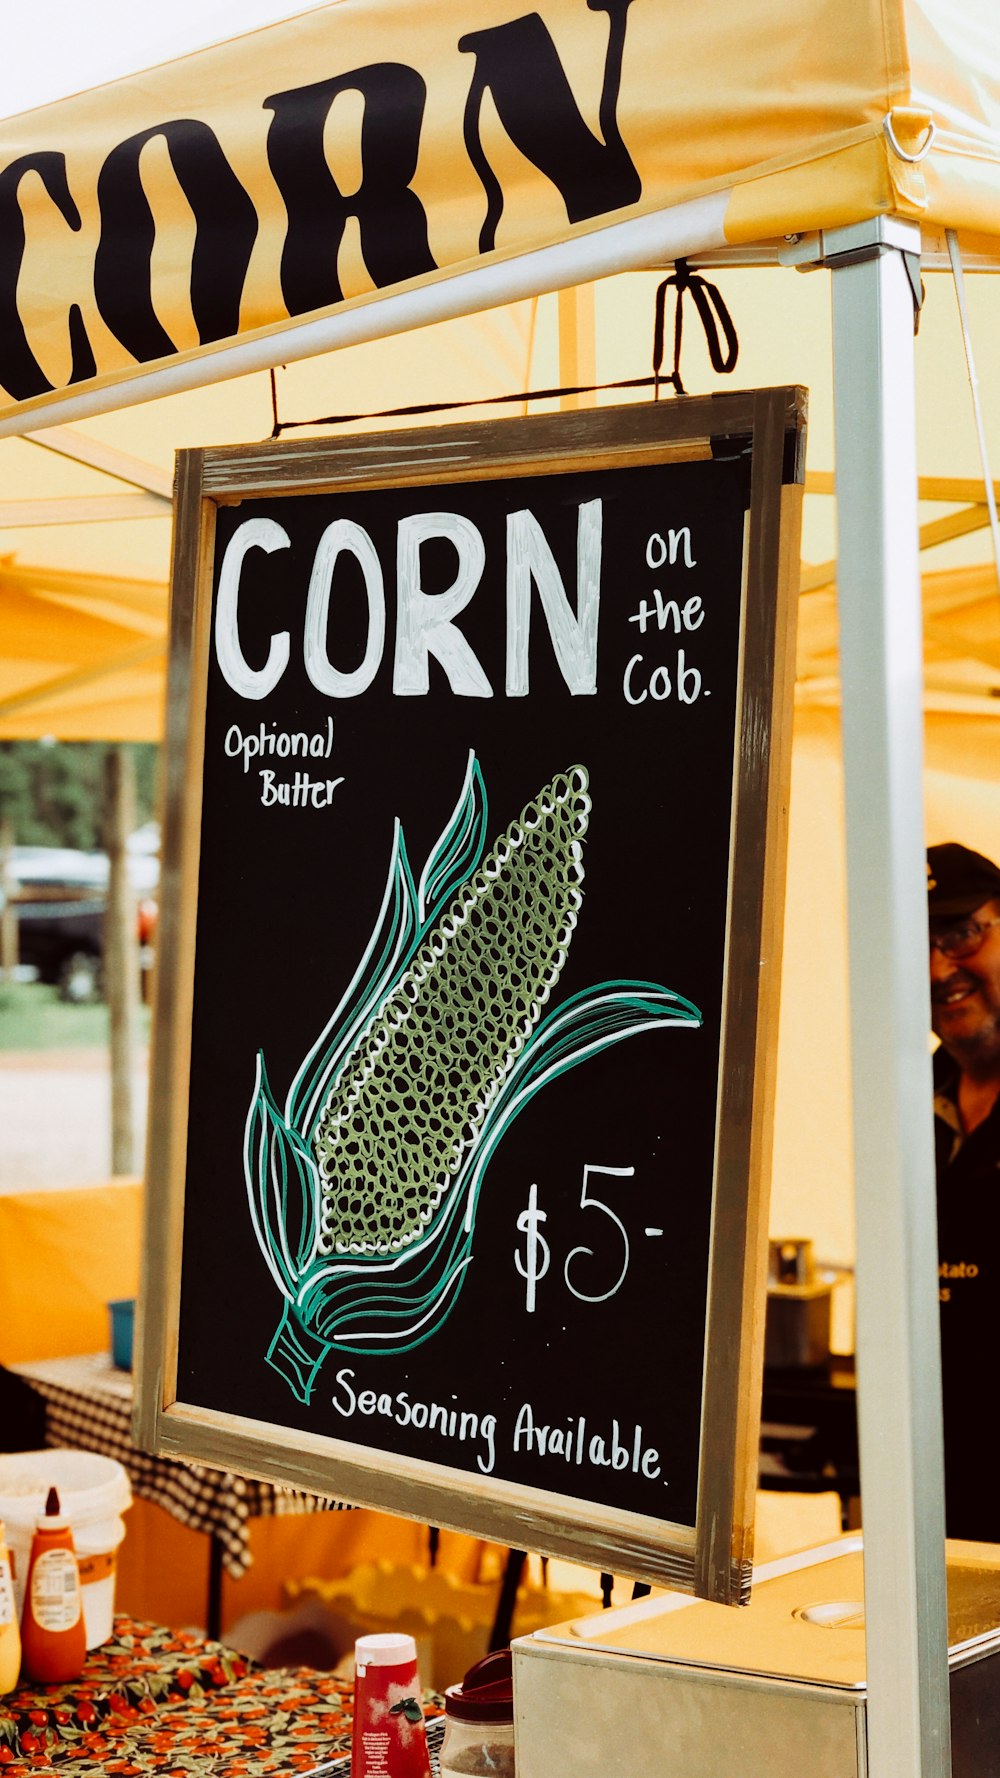 a sign advertising corn on the cob at a farmer's market